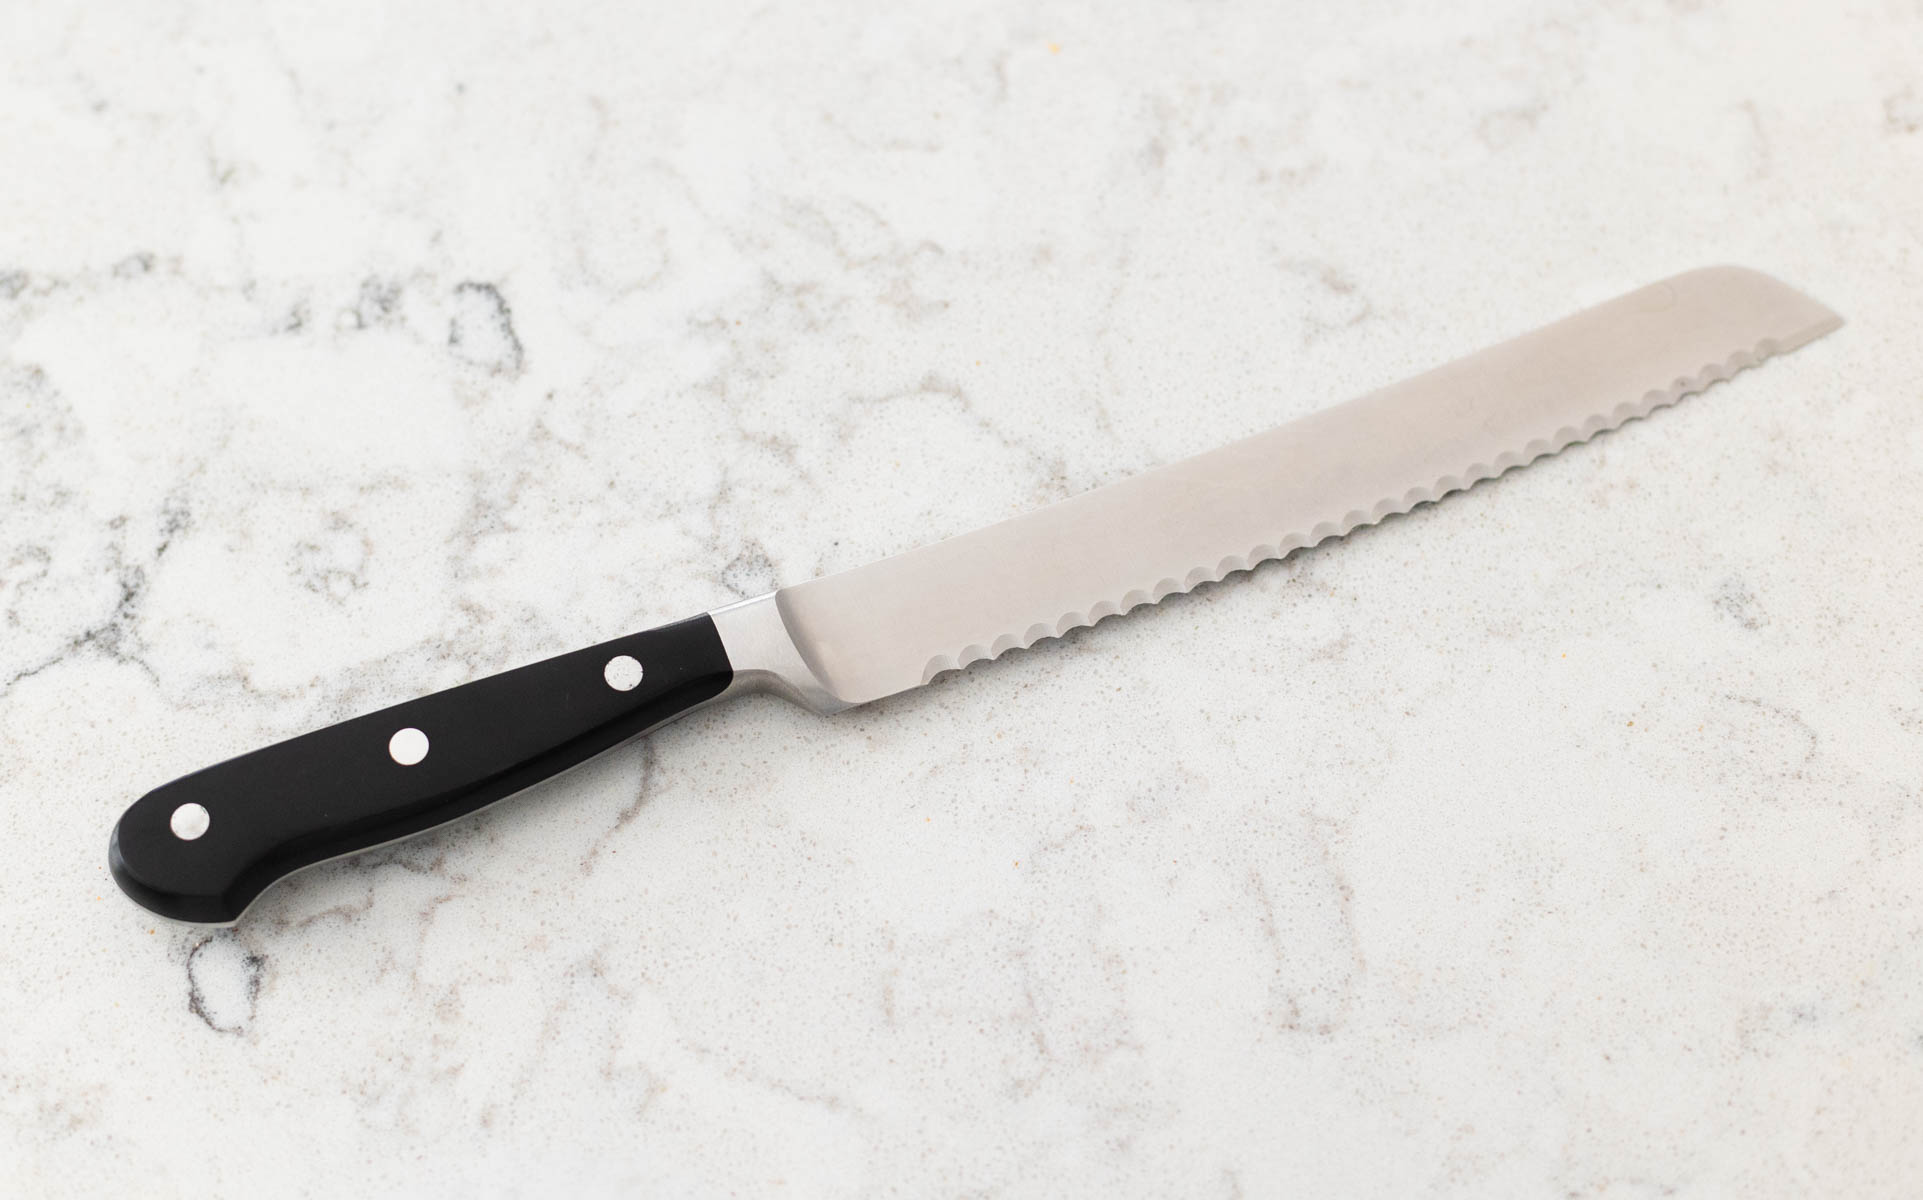 A black-handled serrated bread knife is on the counter.